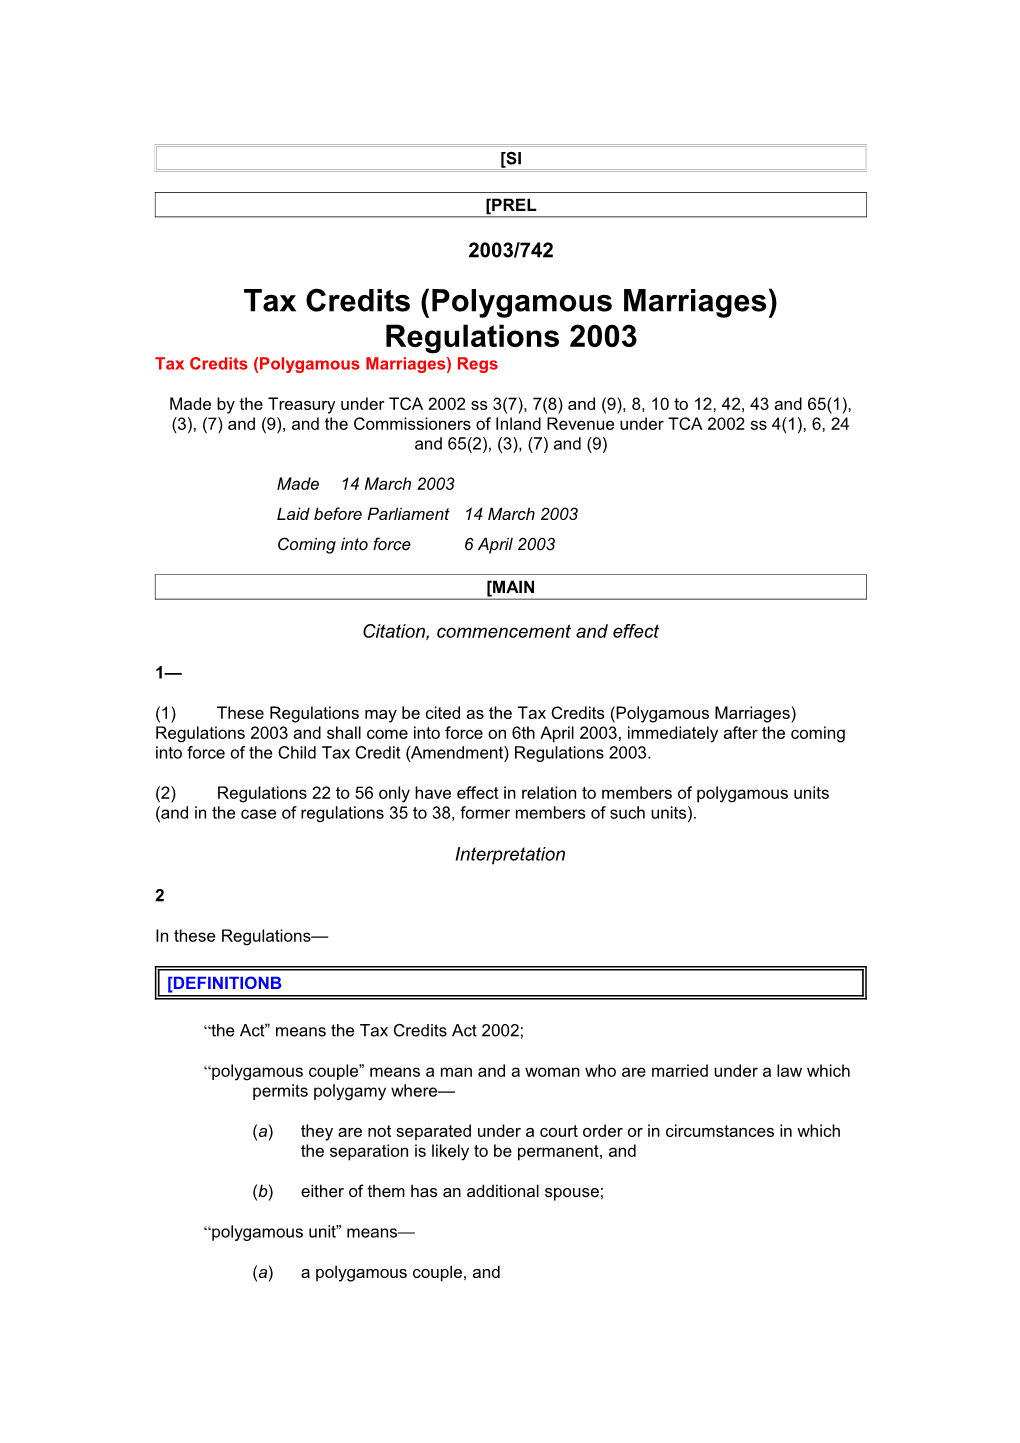 Tax Credits (Polygamous Marriages) Regulations 2003